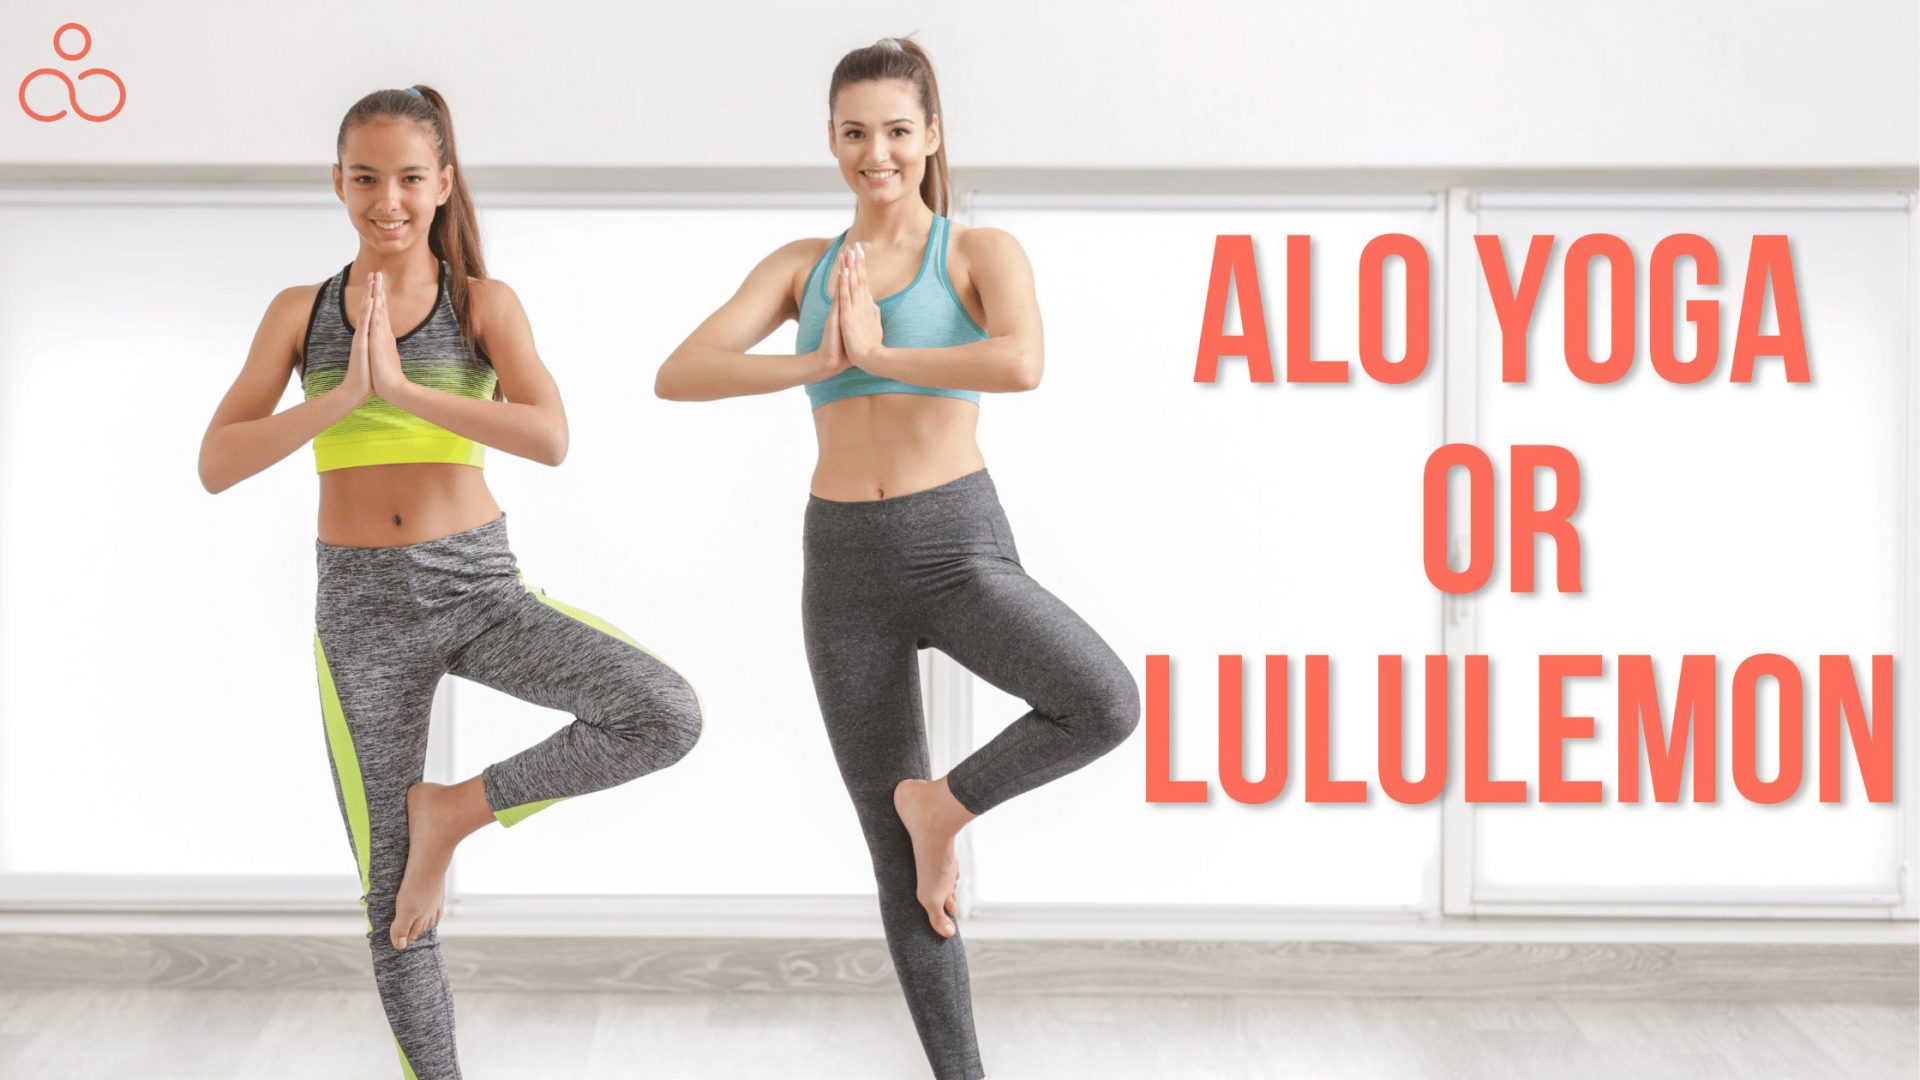 We Searched for Affordable Lululemon Legging Dupes  Here are the Results   ALine Magazine